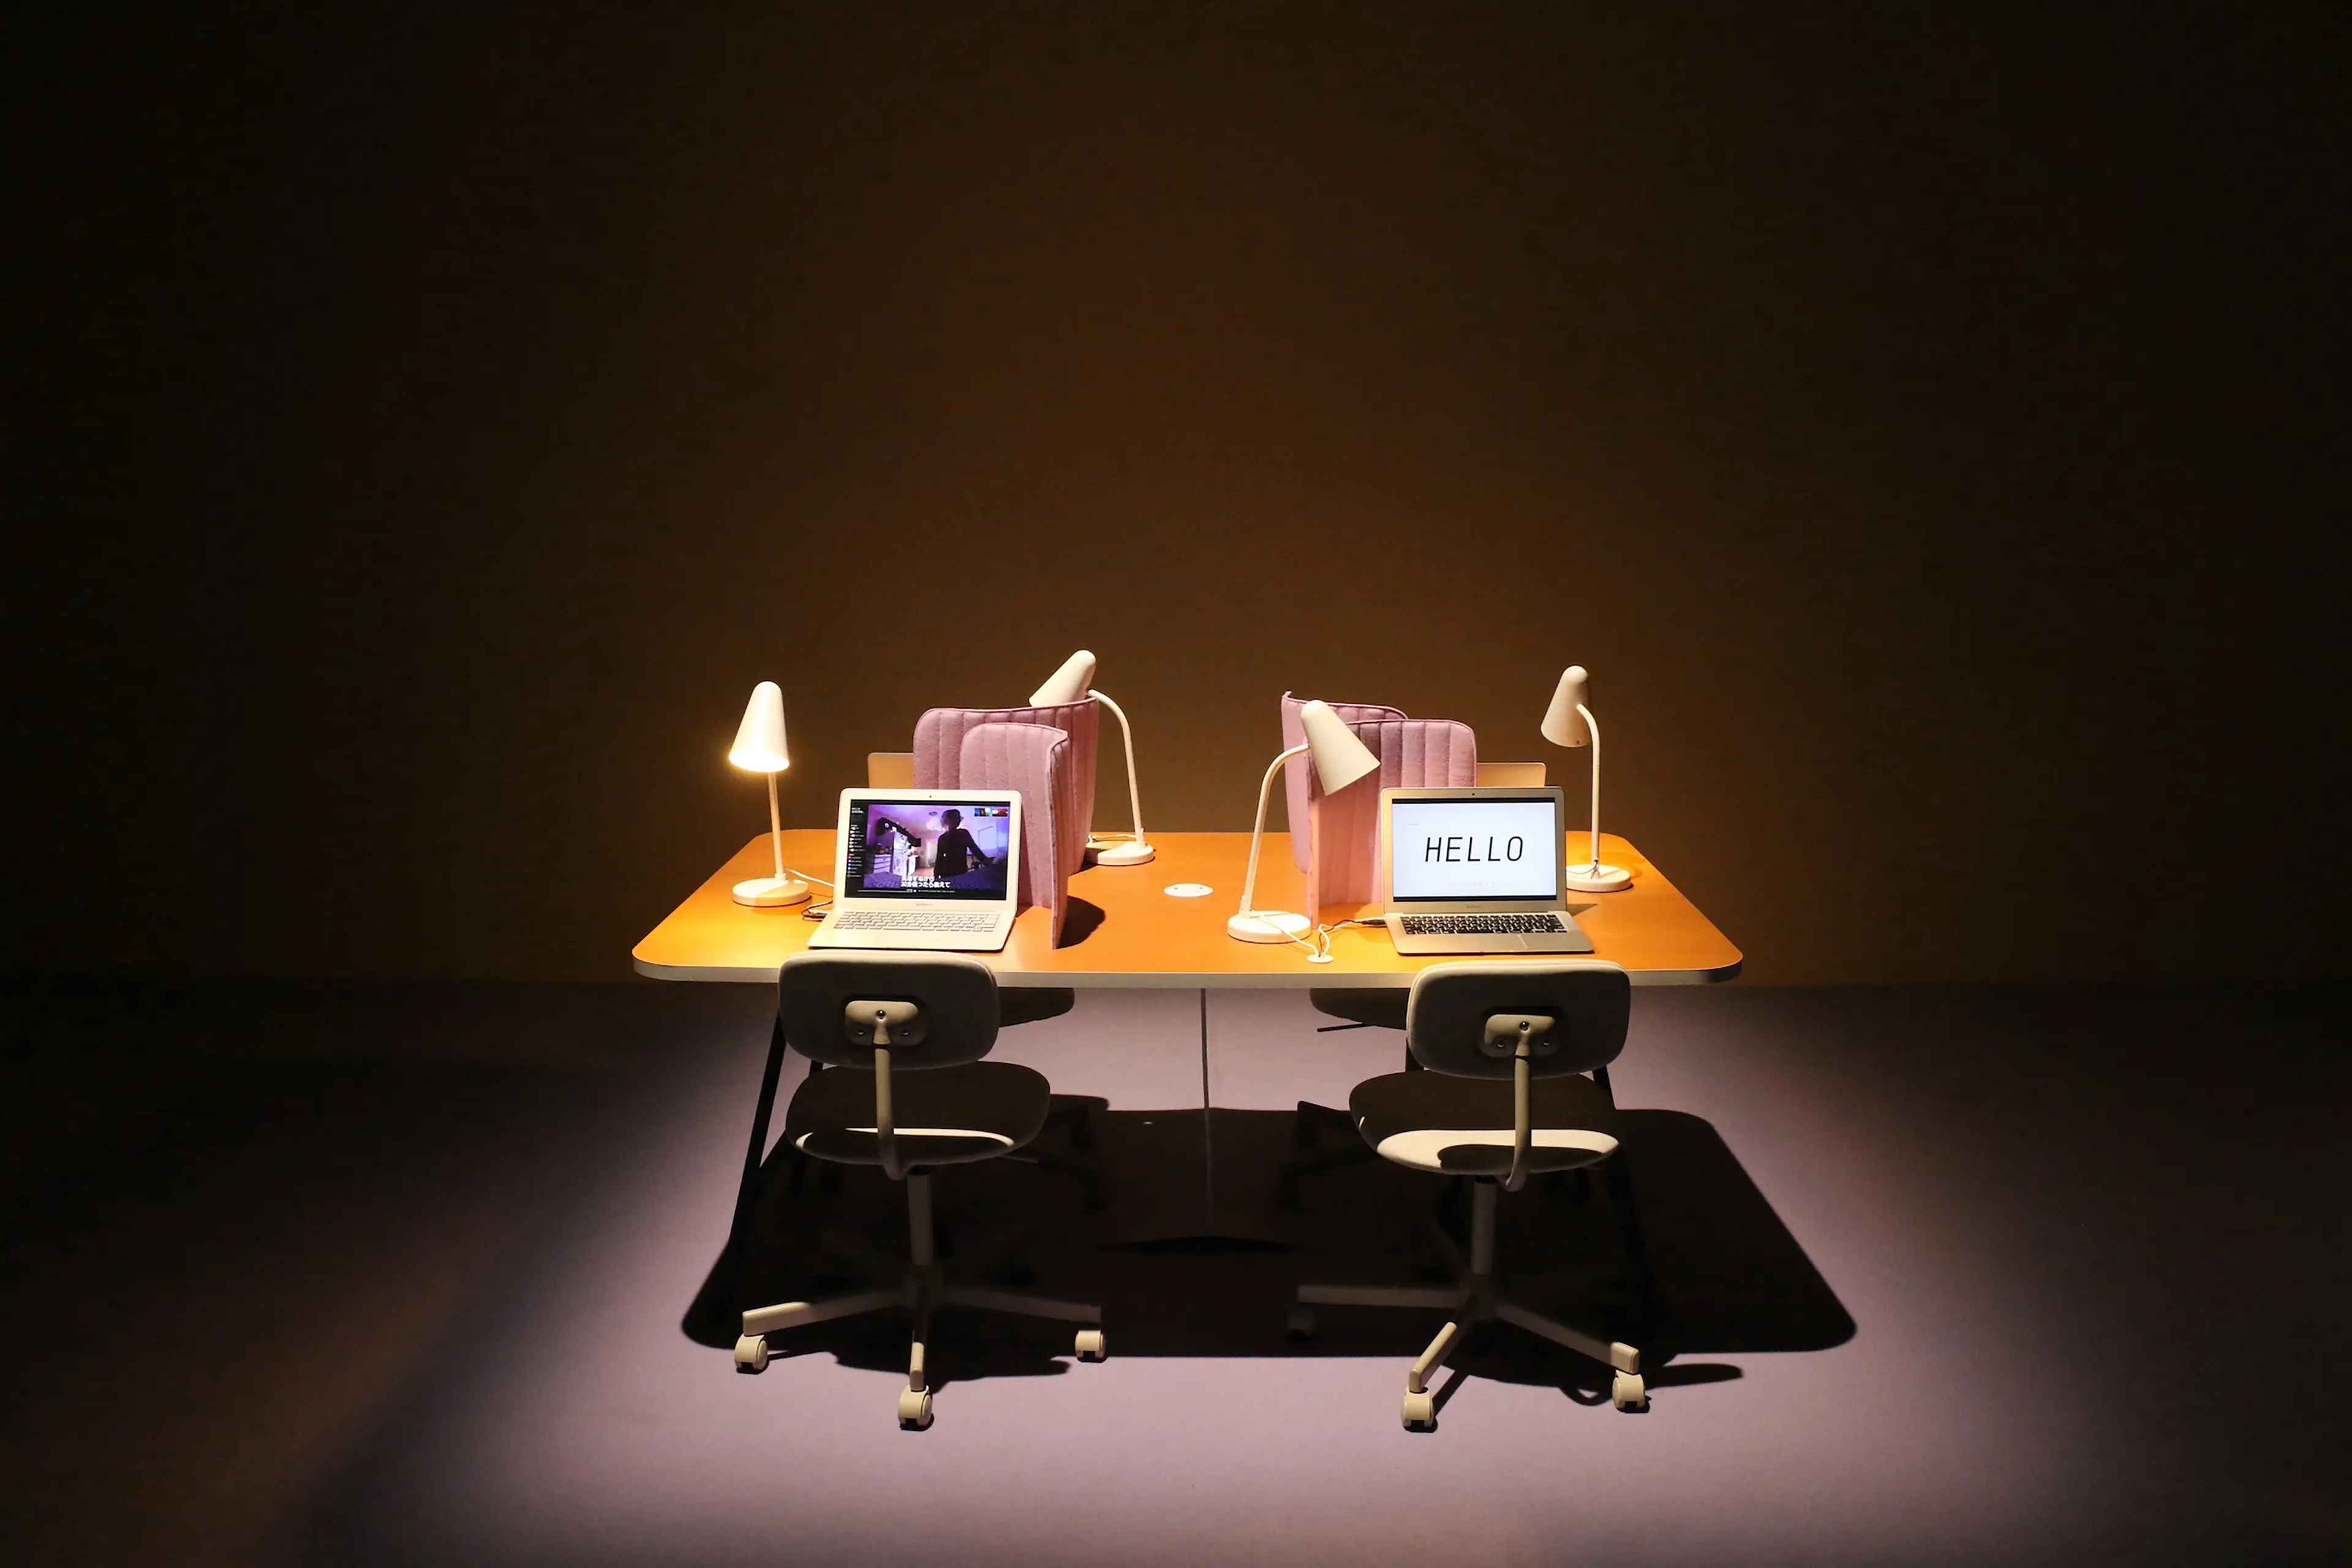 View of a desk and four empty chairs in a dark room lit from above.  Each chair has a laptop and a lamp on the desk.